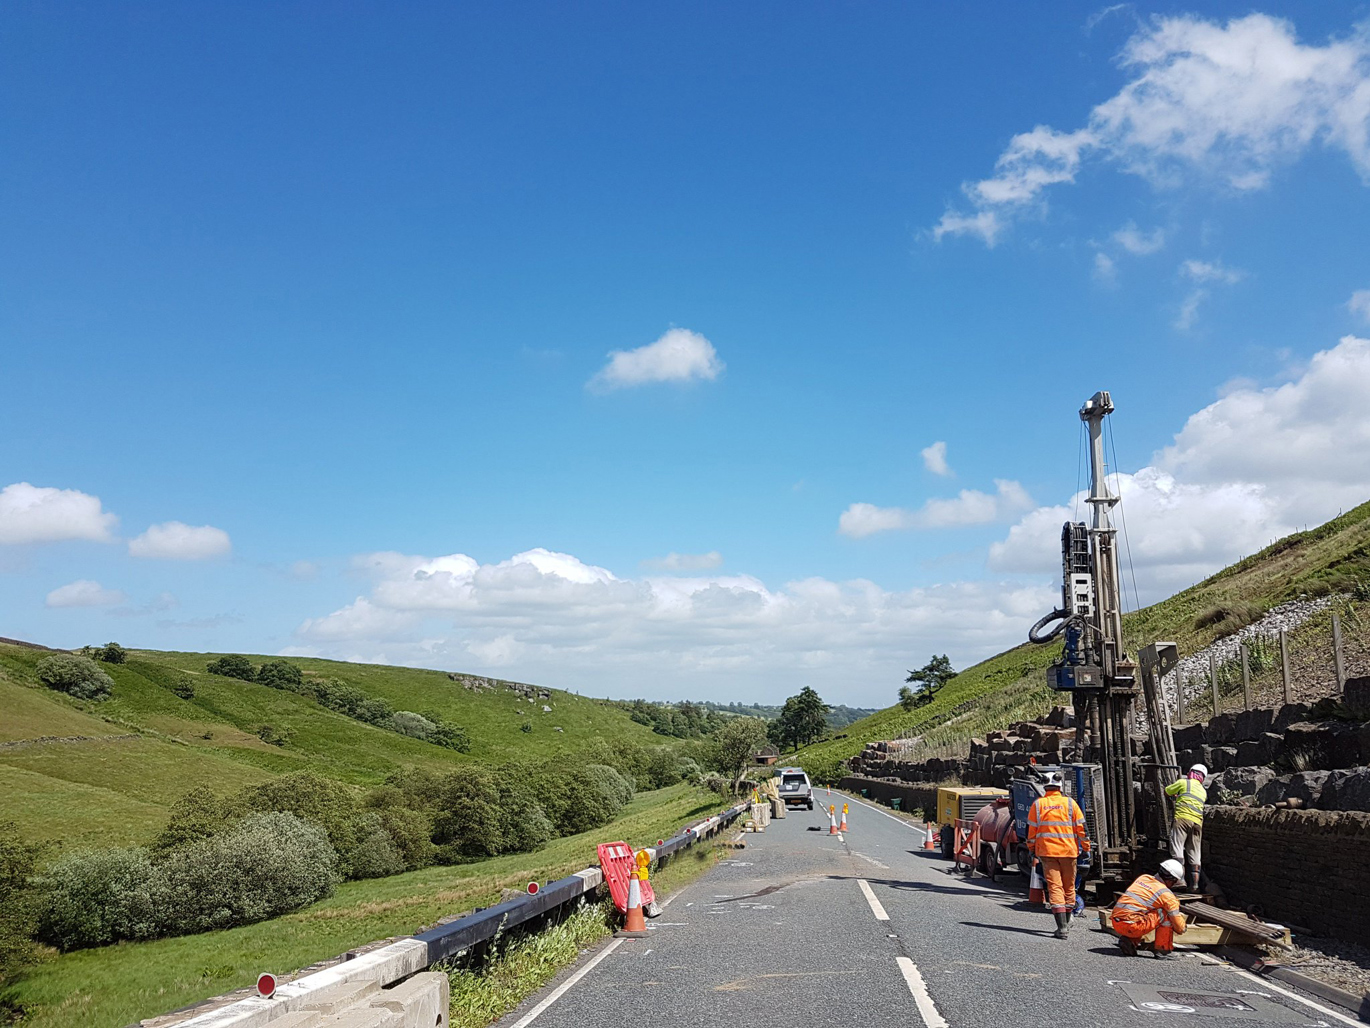 Rotary rig set up on the side of a country road drilling a borehole